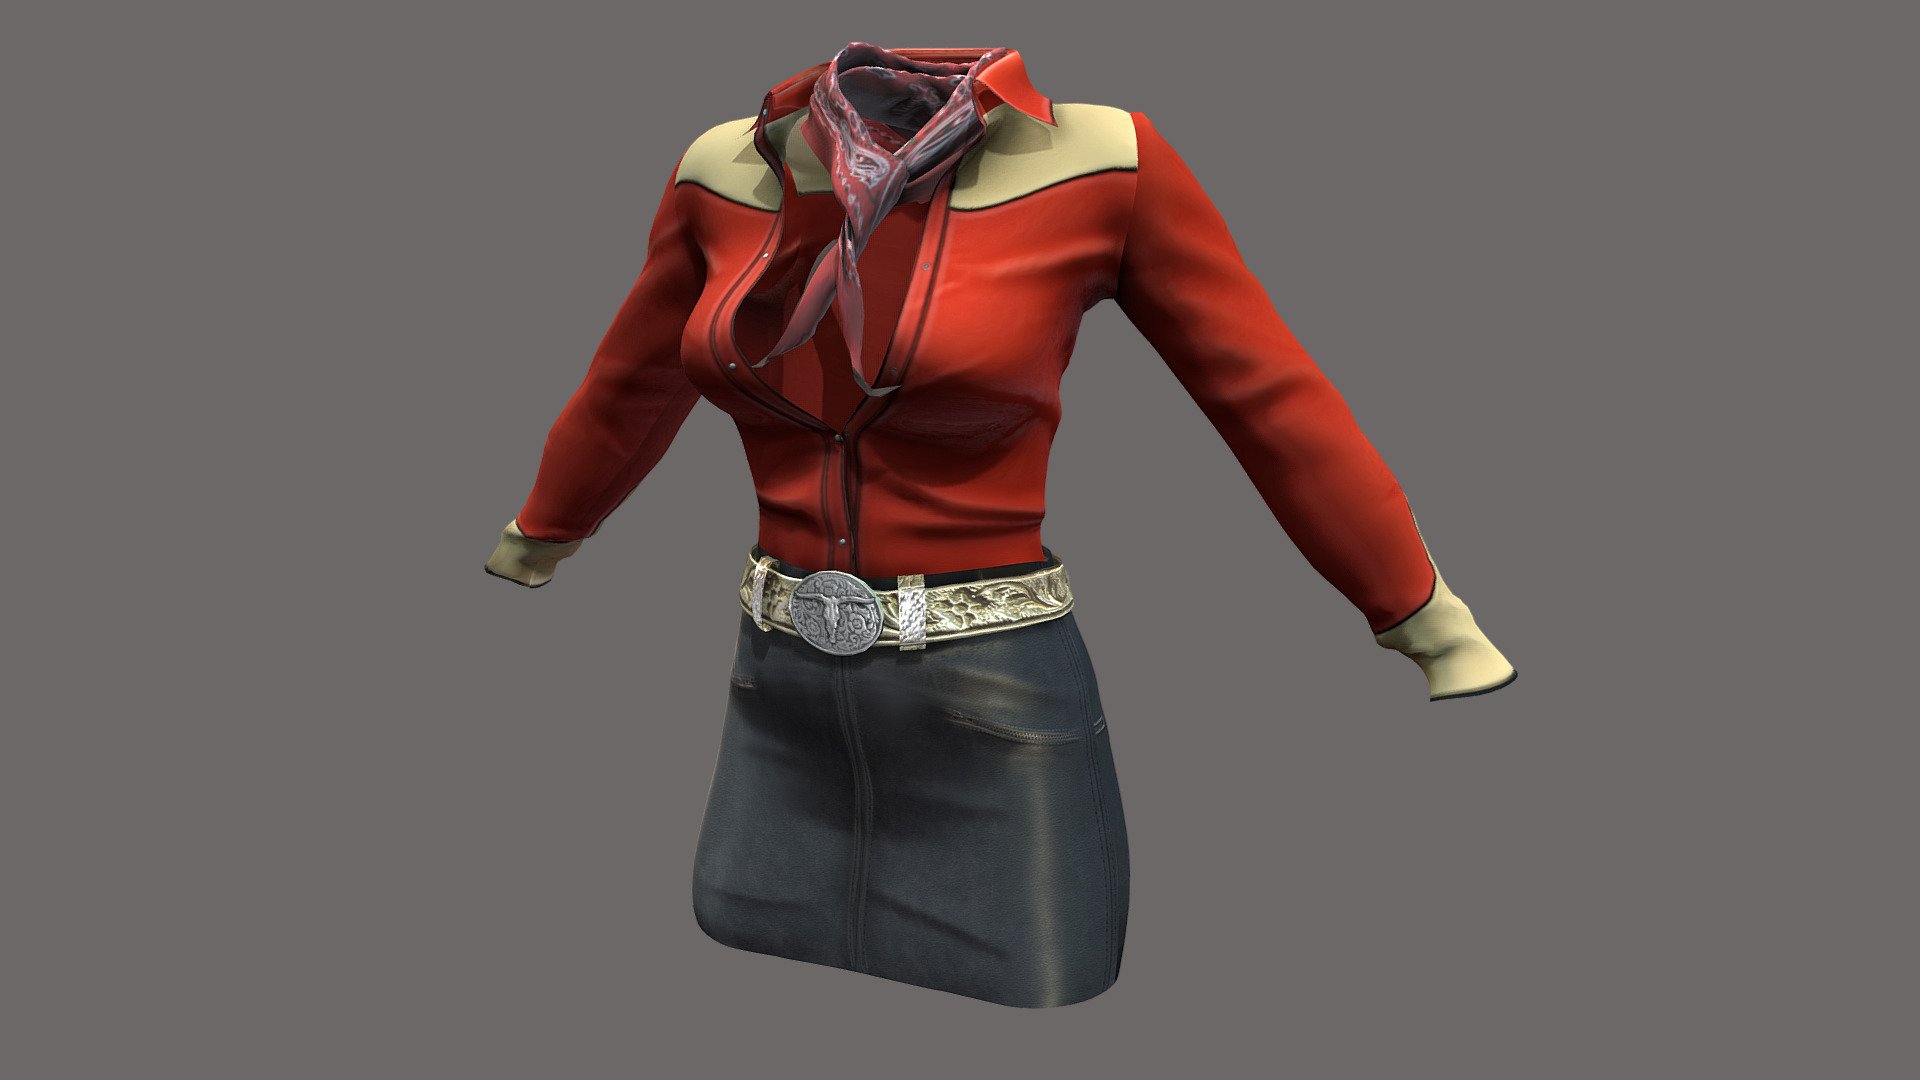 Scarf + Shirt + Skirt (Separate models)

Can be fitted to any character

Ready for games

Clean topology

Unwrapped UVs

High quality realistic textues

FBX, OBJ, gITF, USDZ (request other formats)

PBR or Classic

Please ask for any other questions

Type     user:3dia &ldquo;search term